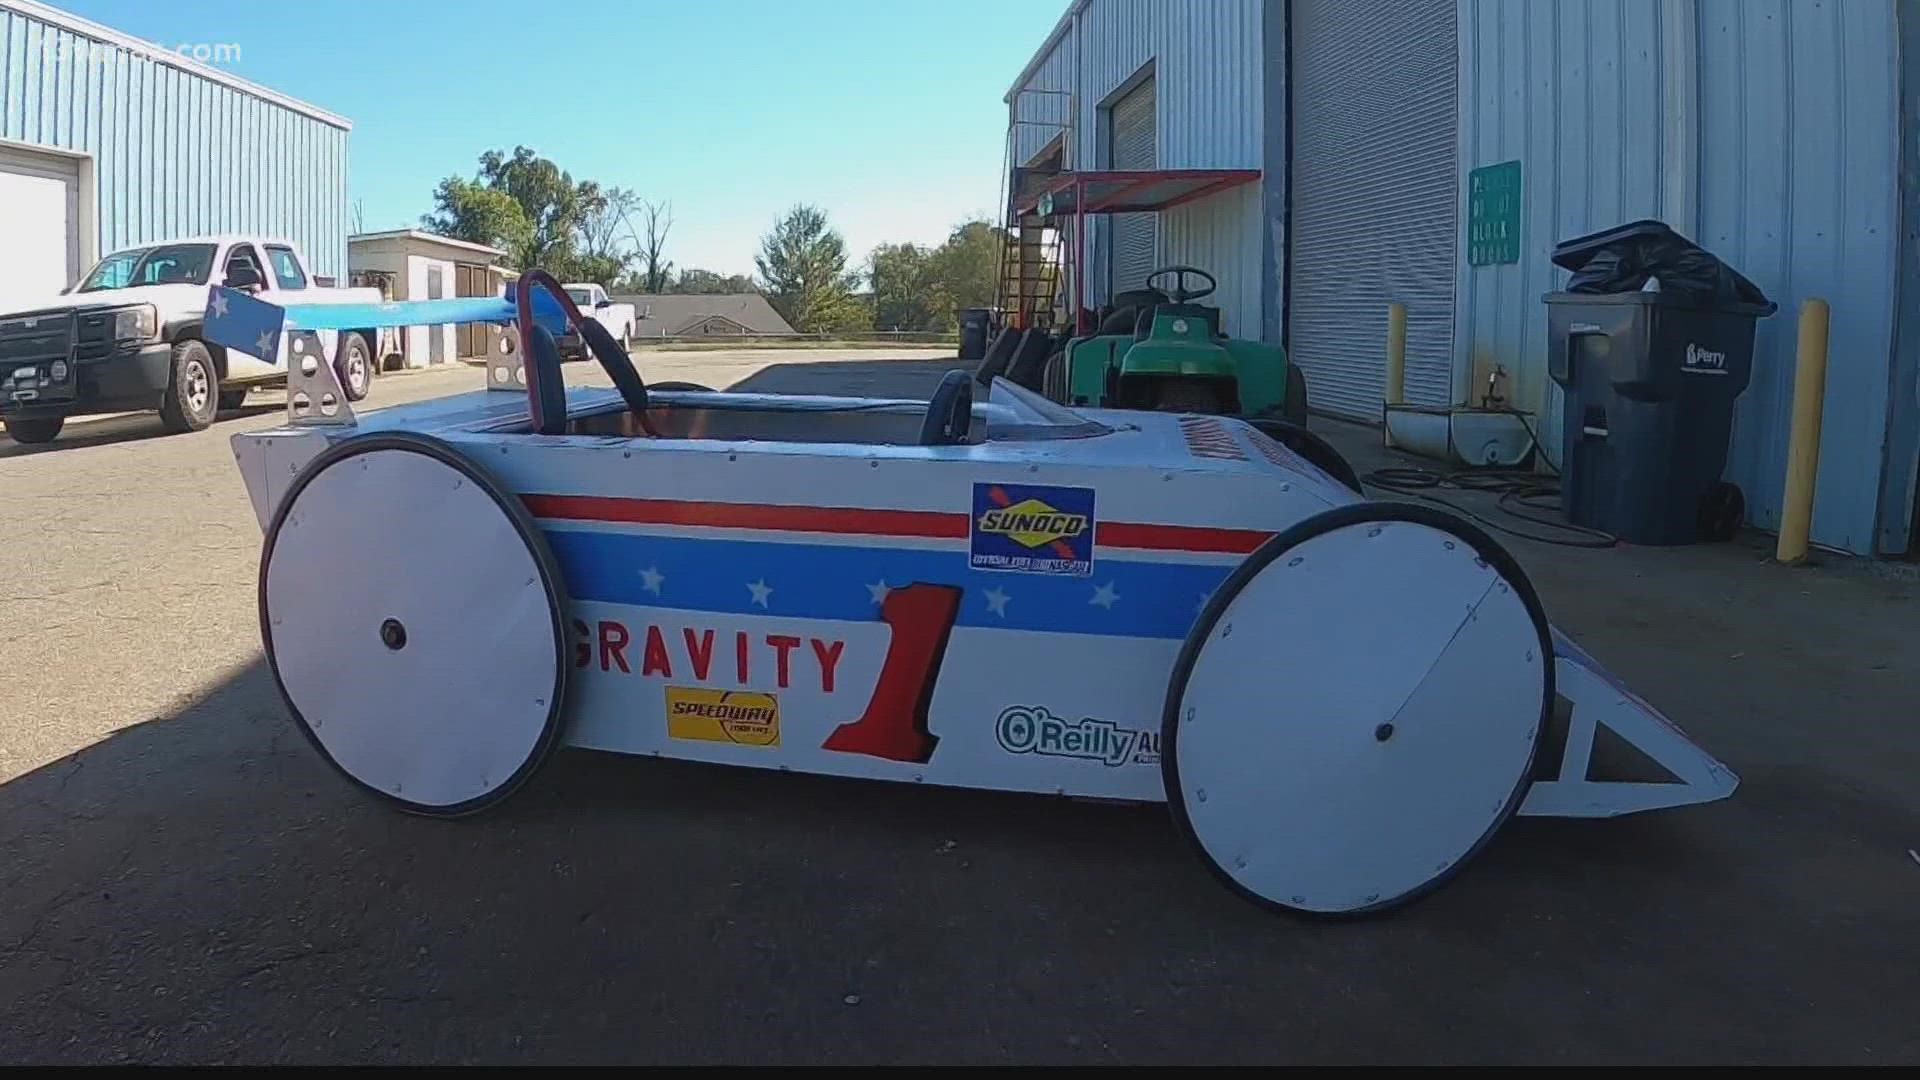 Derby car racing is back in Perry this weekend, and it kicks off at 10 a.m. Saturday on Washington Street.